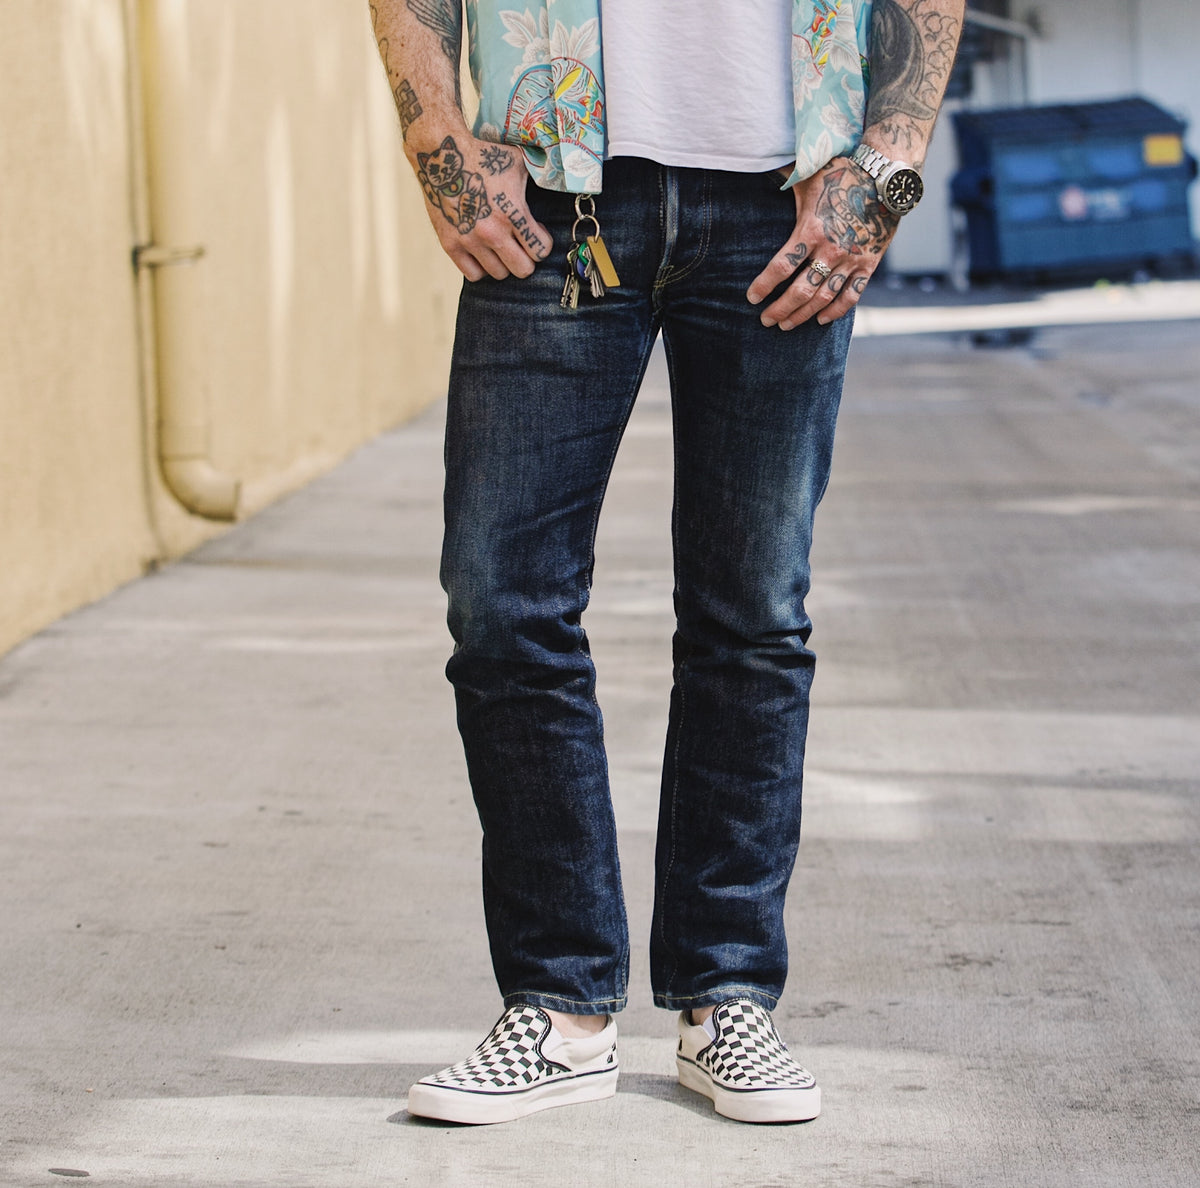 Men's Jeans | Snake Oil Provisions – Page 2